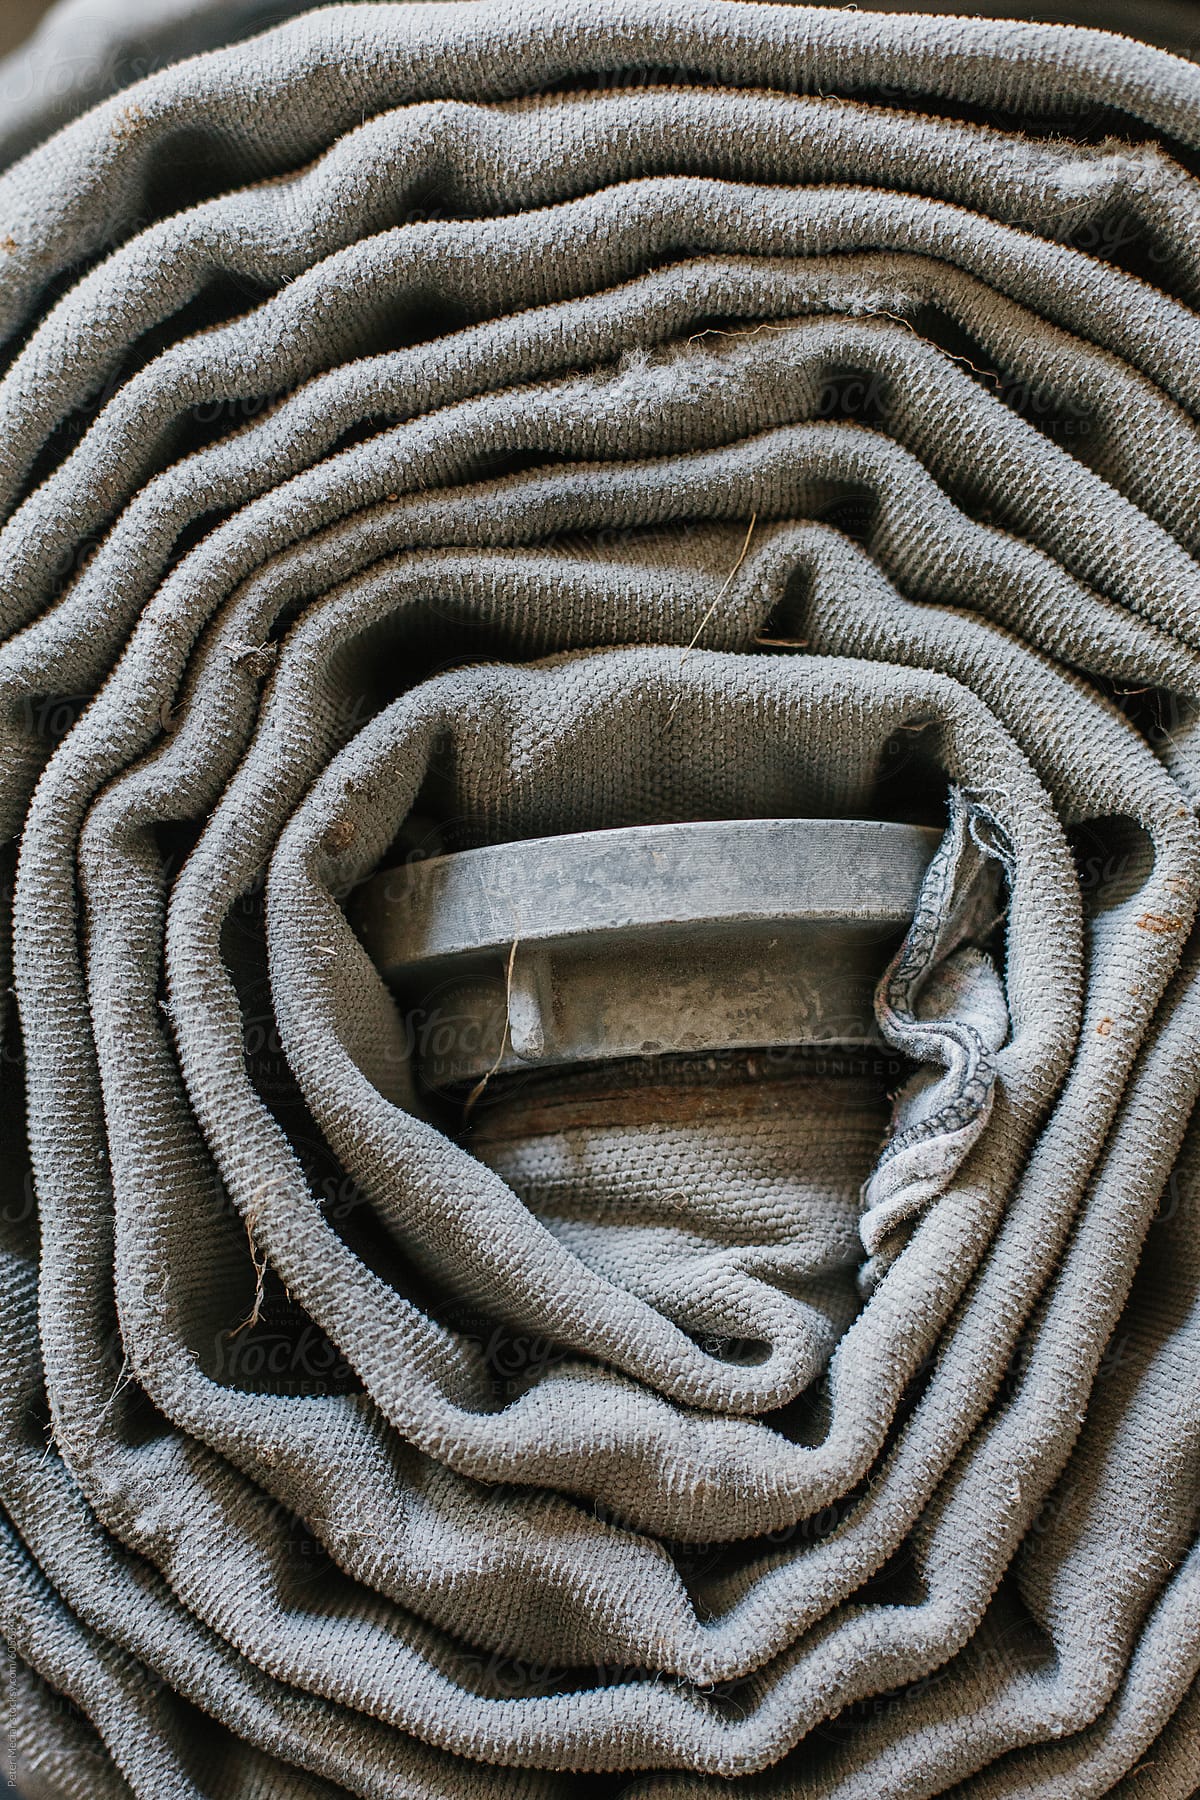 Wrapped old fire hoses on the floor